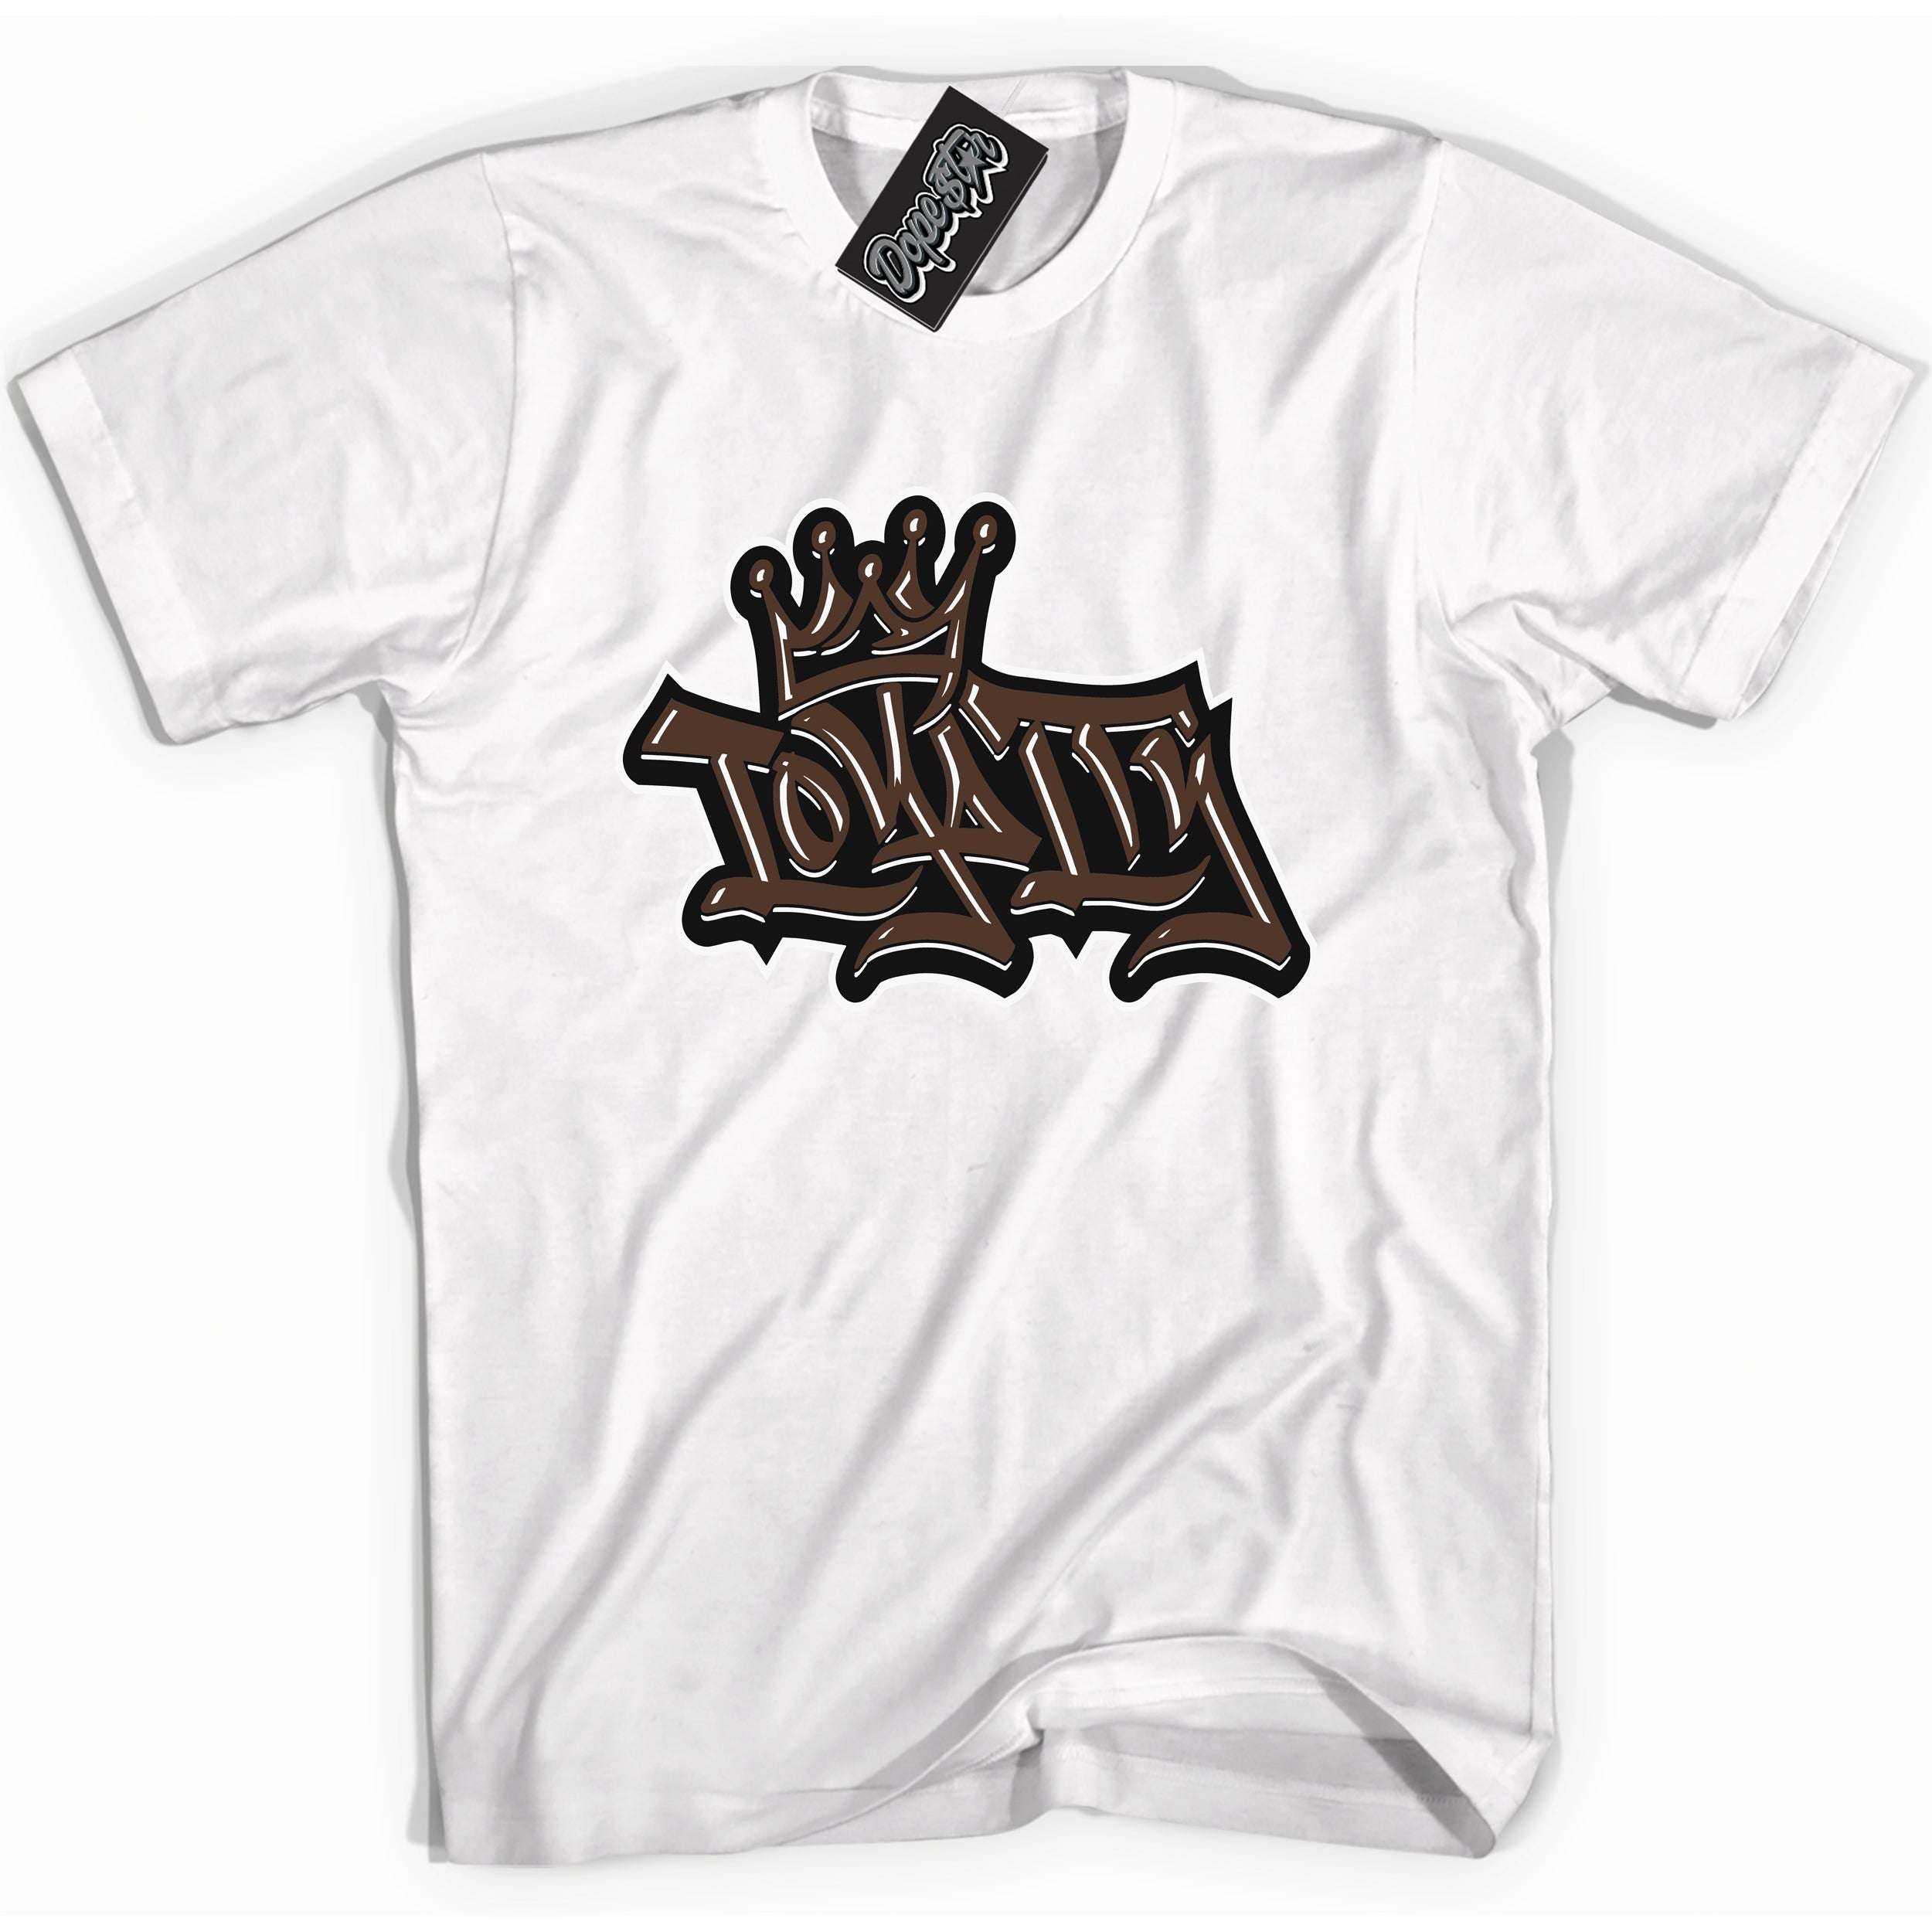 Cool White graphic tee with “ Loyalty Crown ” design, that perfectly matches Palomino 1s sneakers 